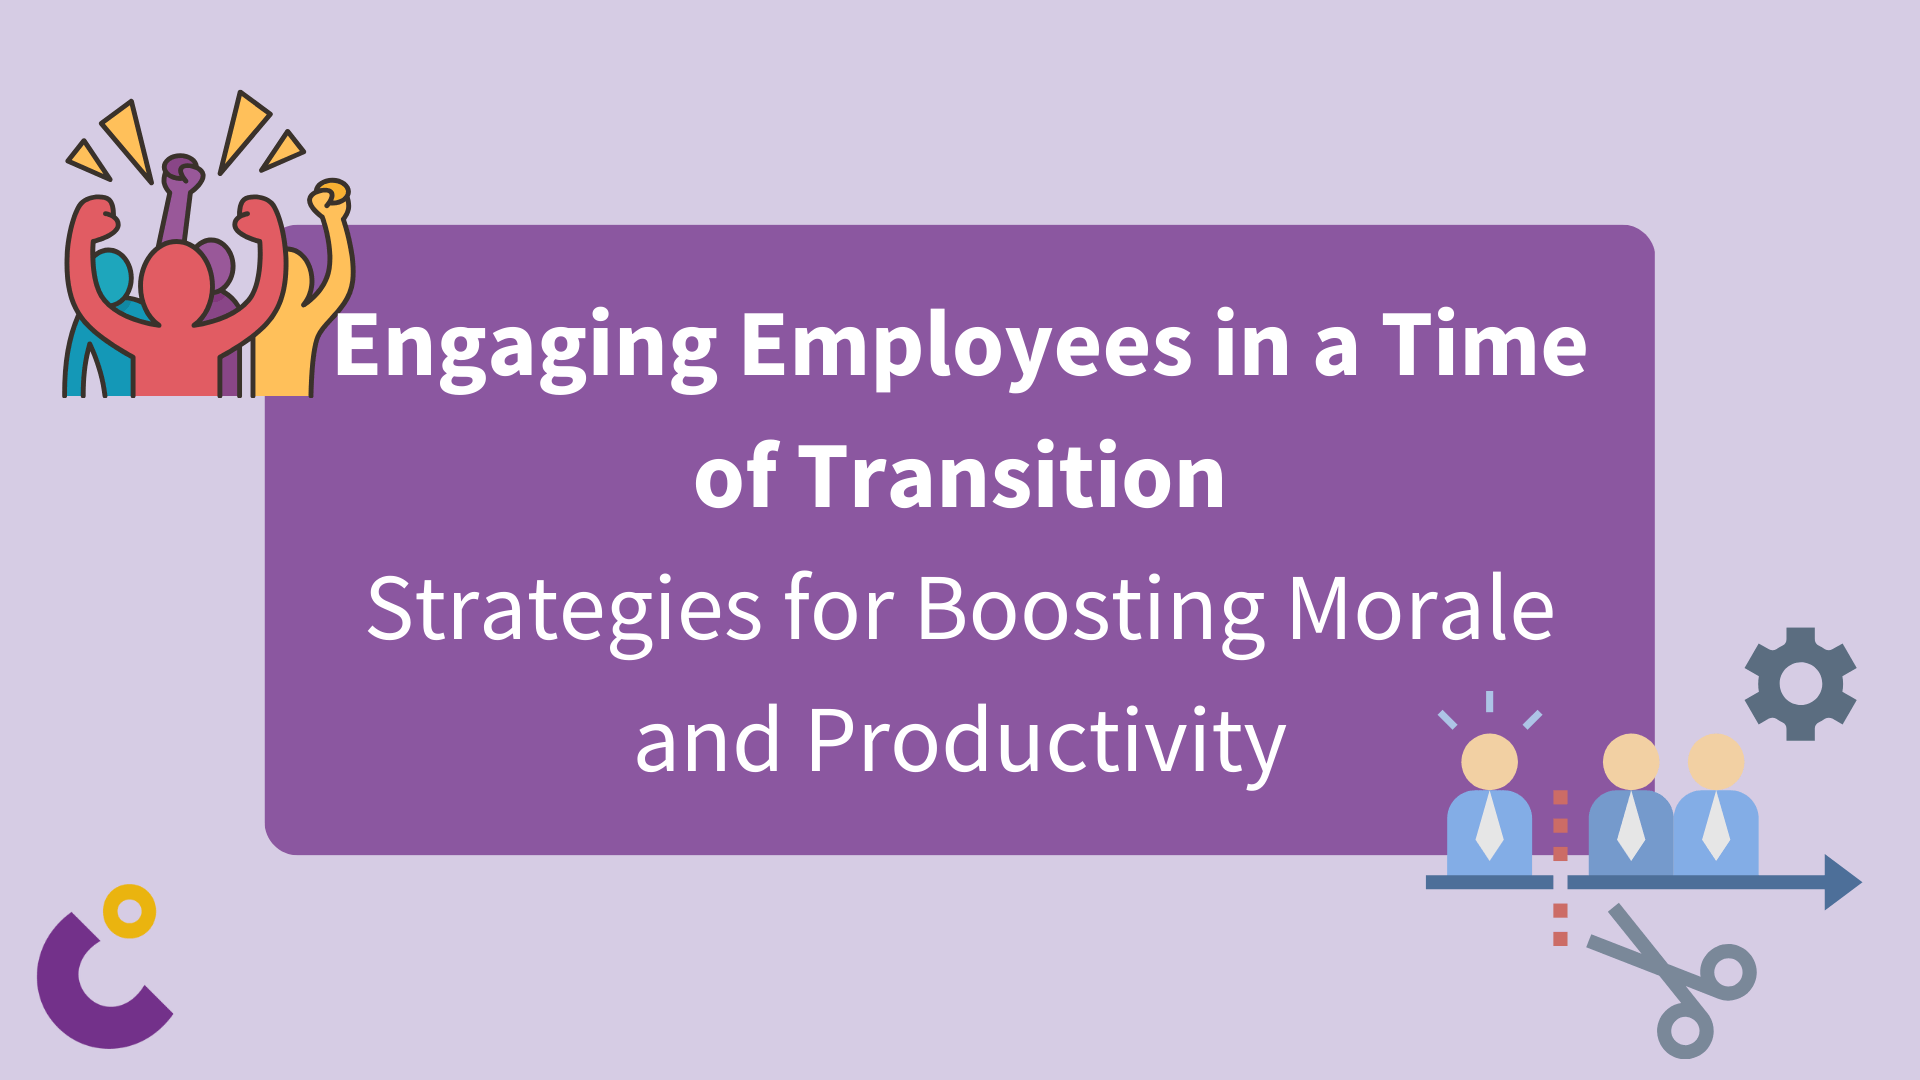 Engaging Employees in a Time of Transition: Strategies for Boosting Morale and Productivity